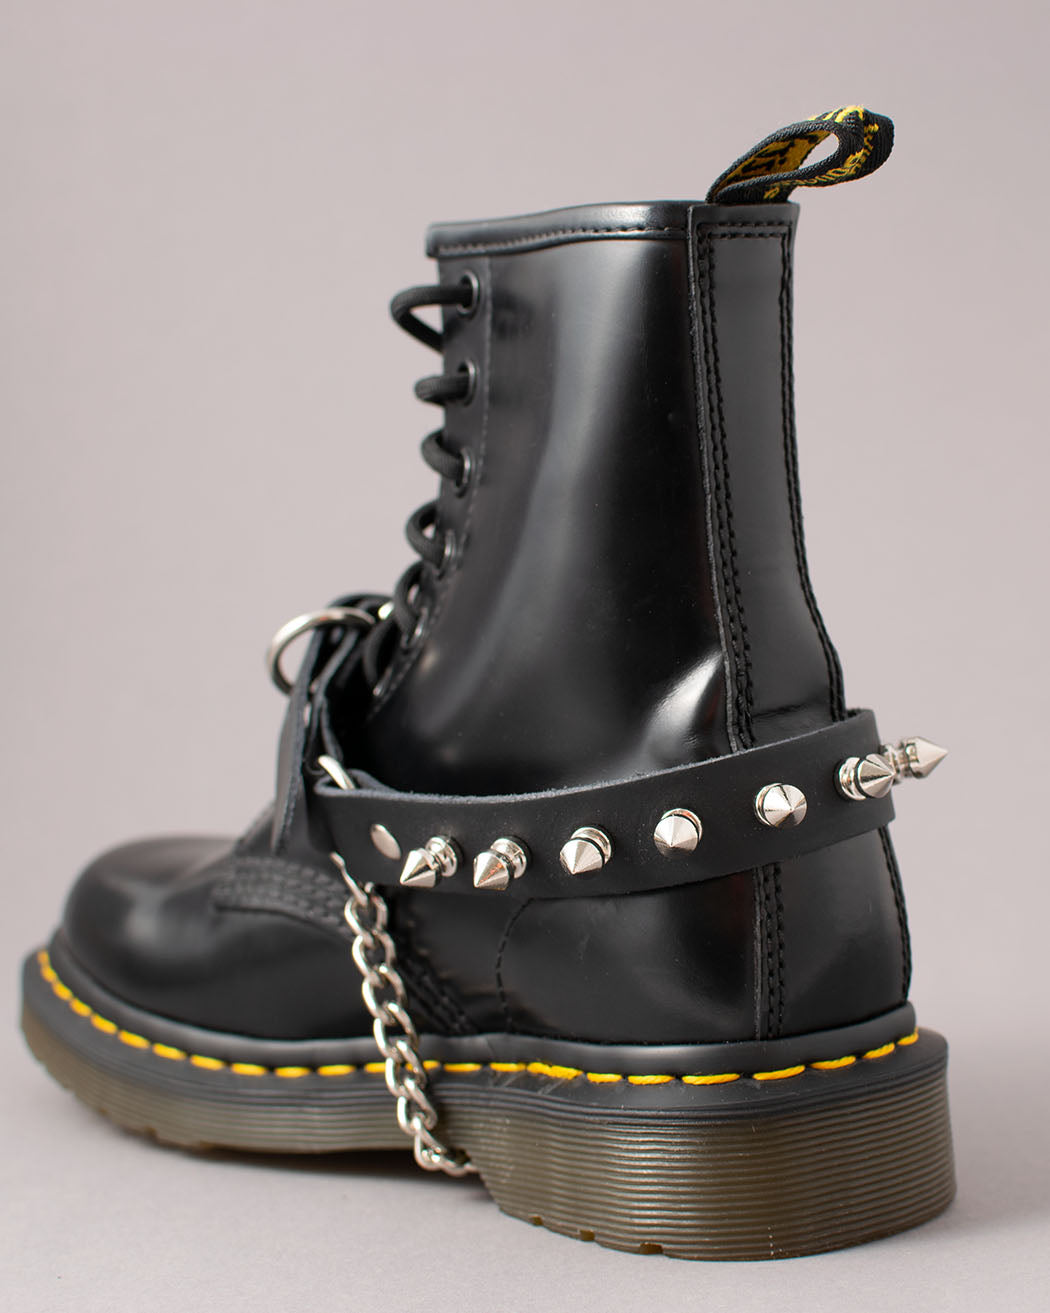 Boot strap, black leather with spike rivets